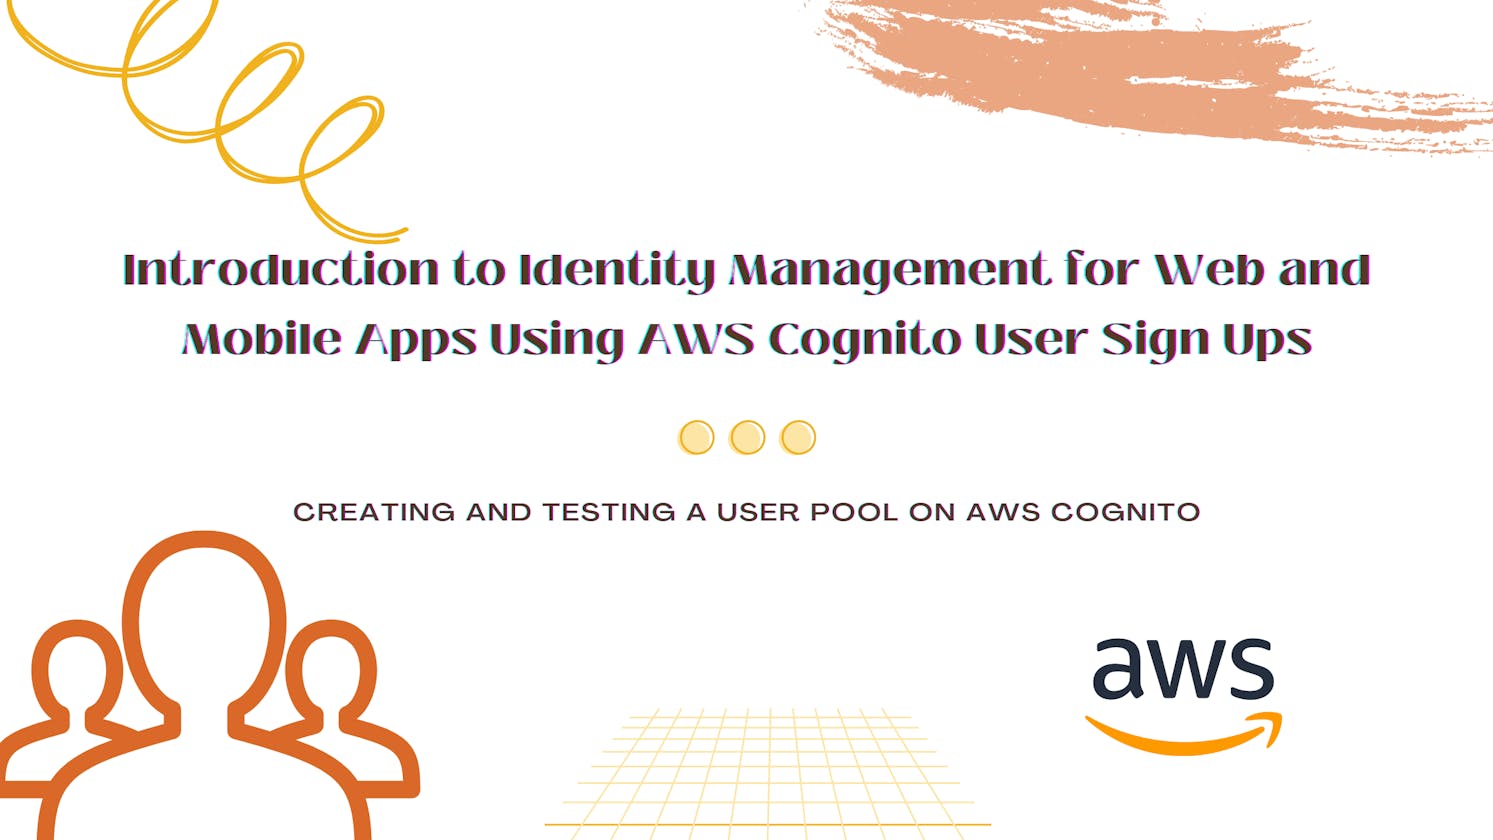 Introduction to Identity Management for Web and Mobile Apps Using AWS Cognito User Sign Ups